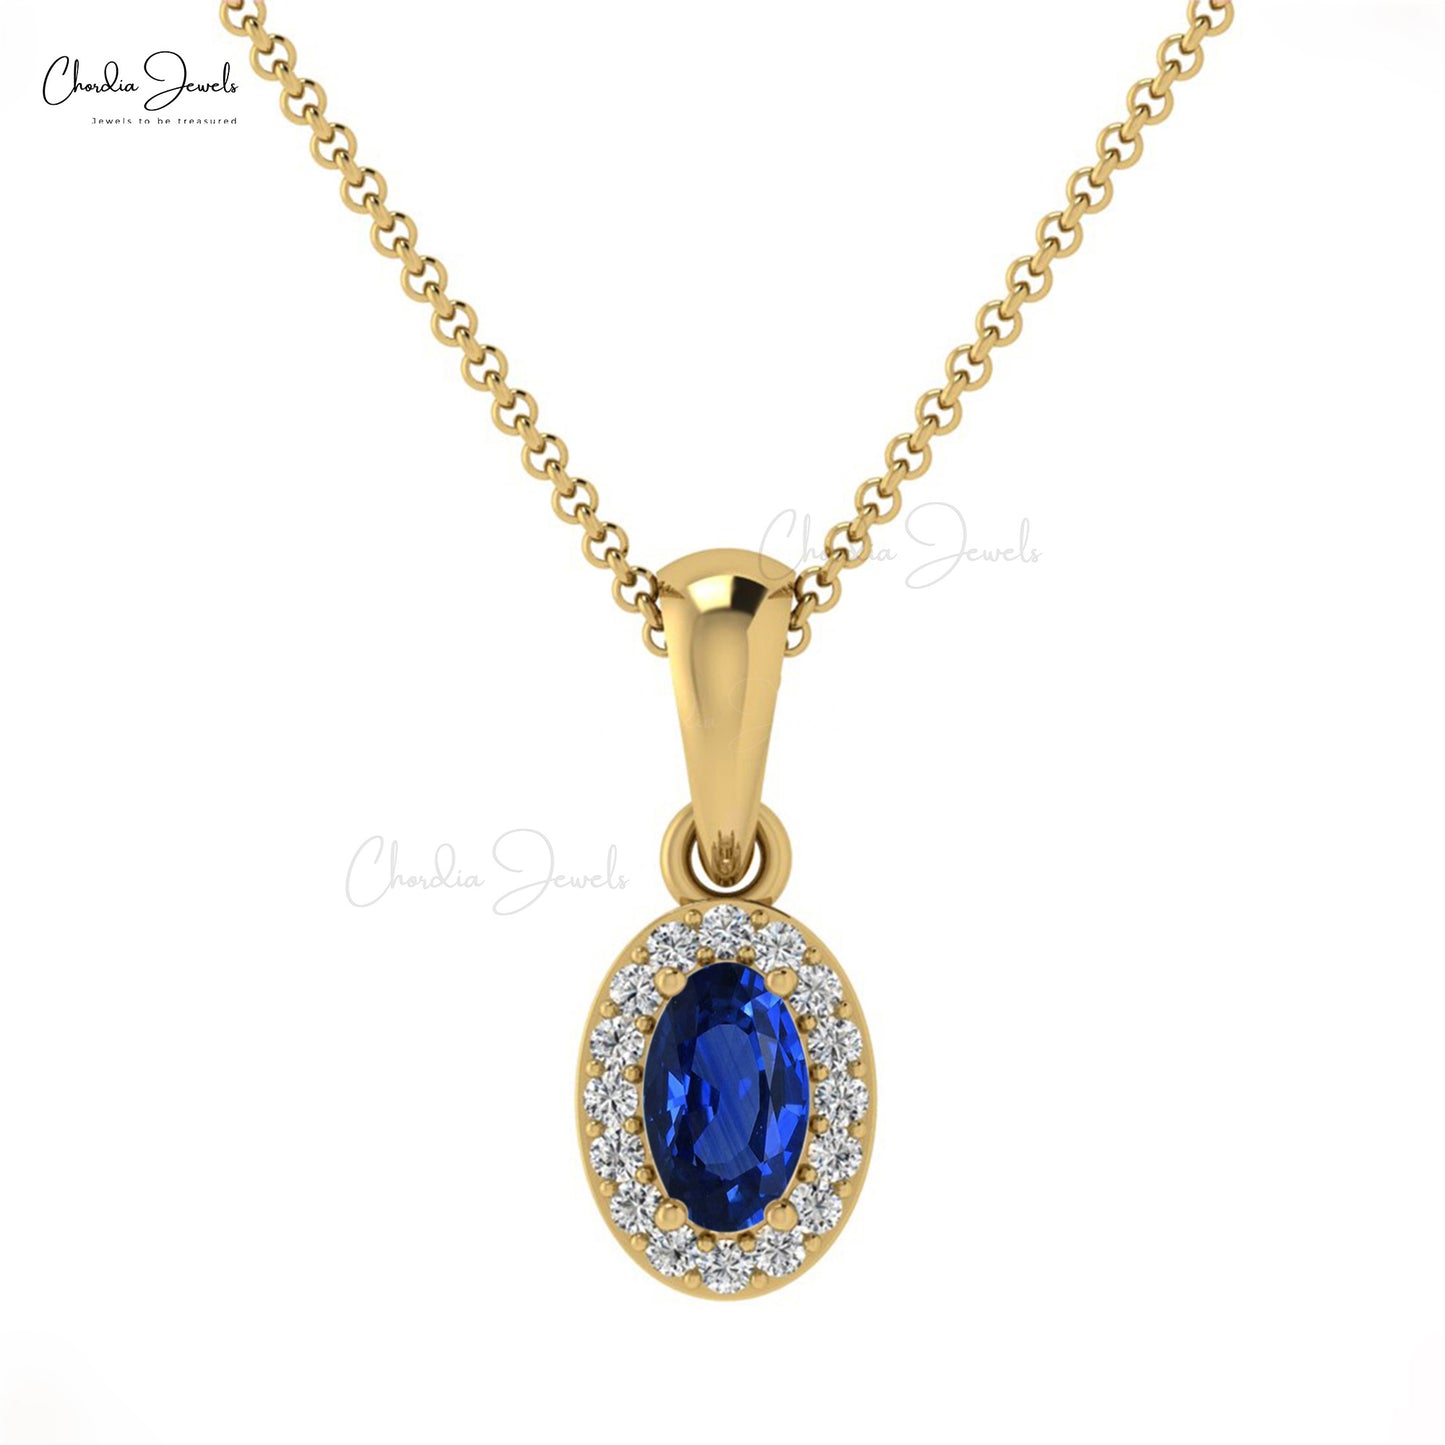 Real 14k Gold Halo Pendant September Birthstone Natural Blue Sapphire and White Diamond Pendant Necklace Engagement Gift For Her